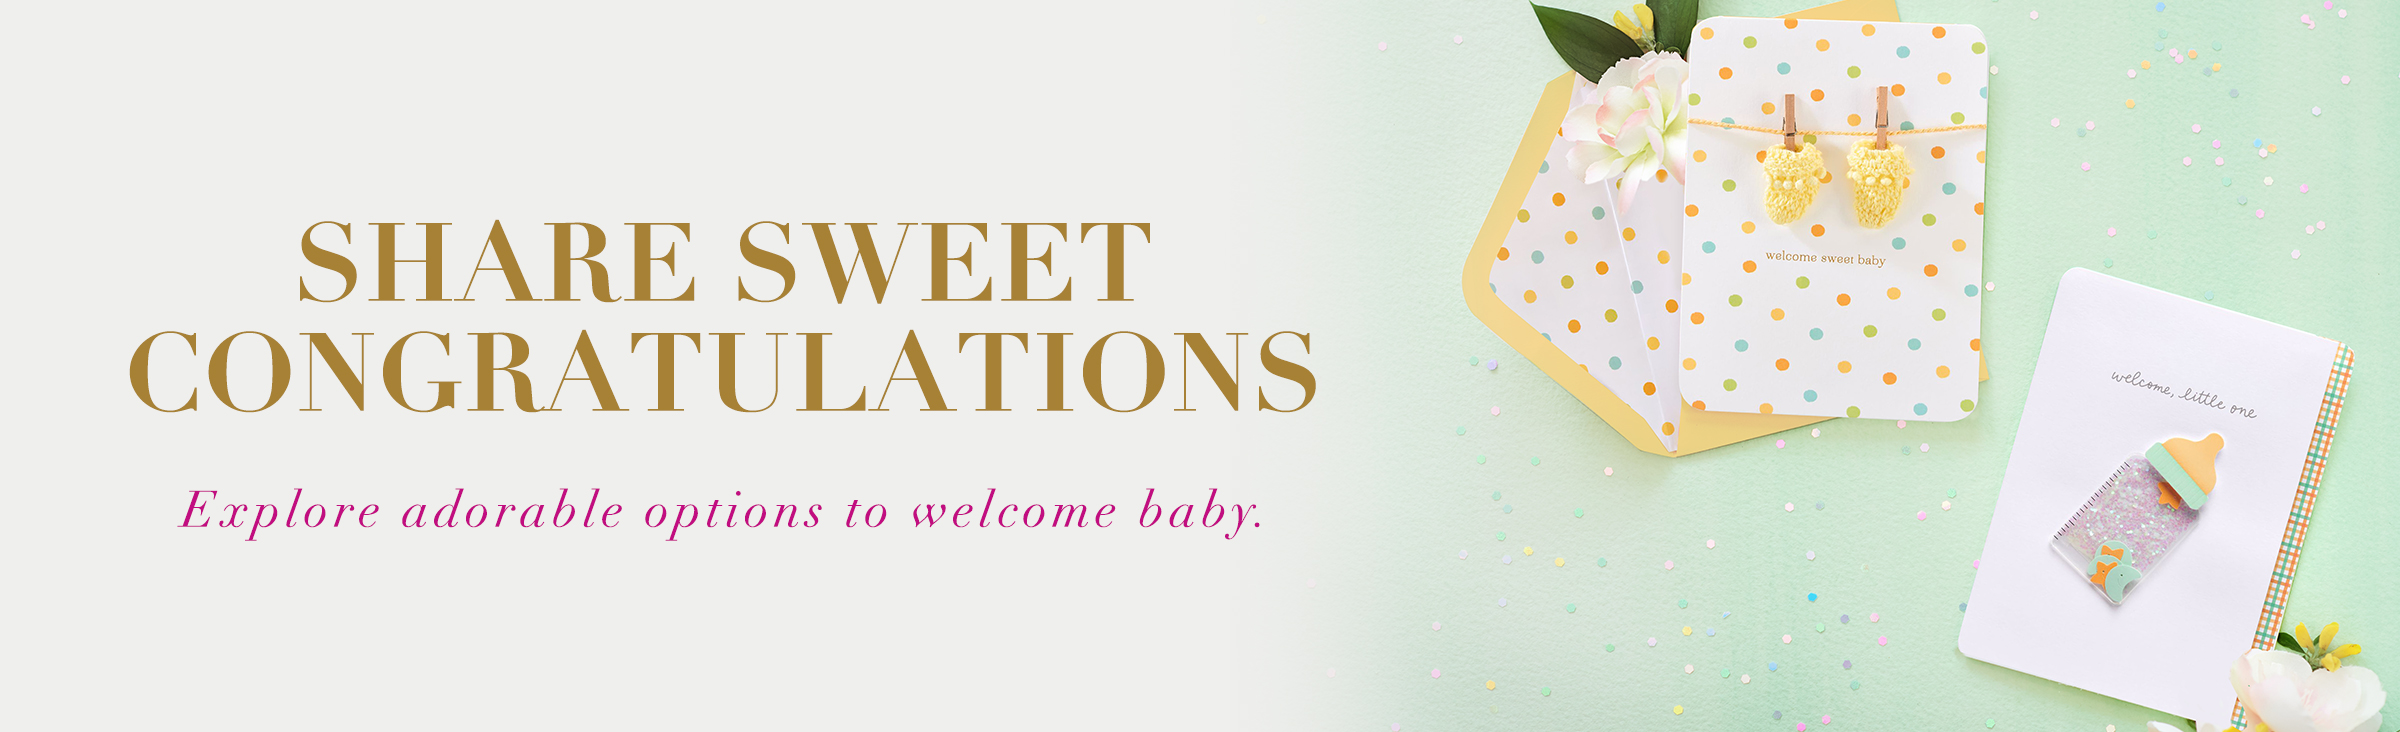 Share sweet congratulatoins Explore adorable options to welcome baby